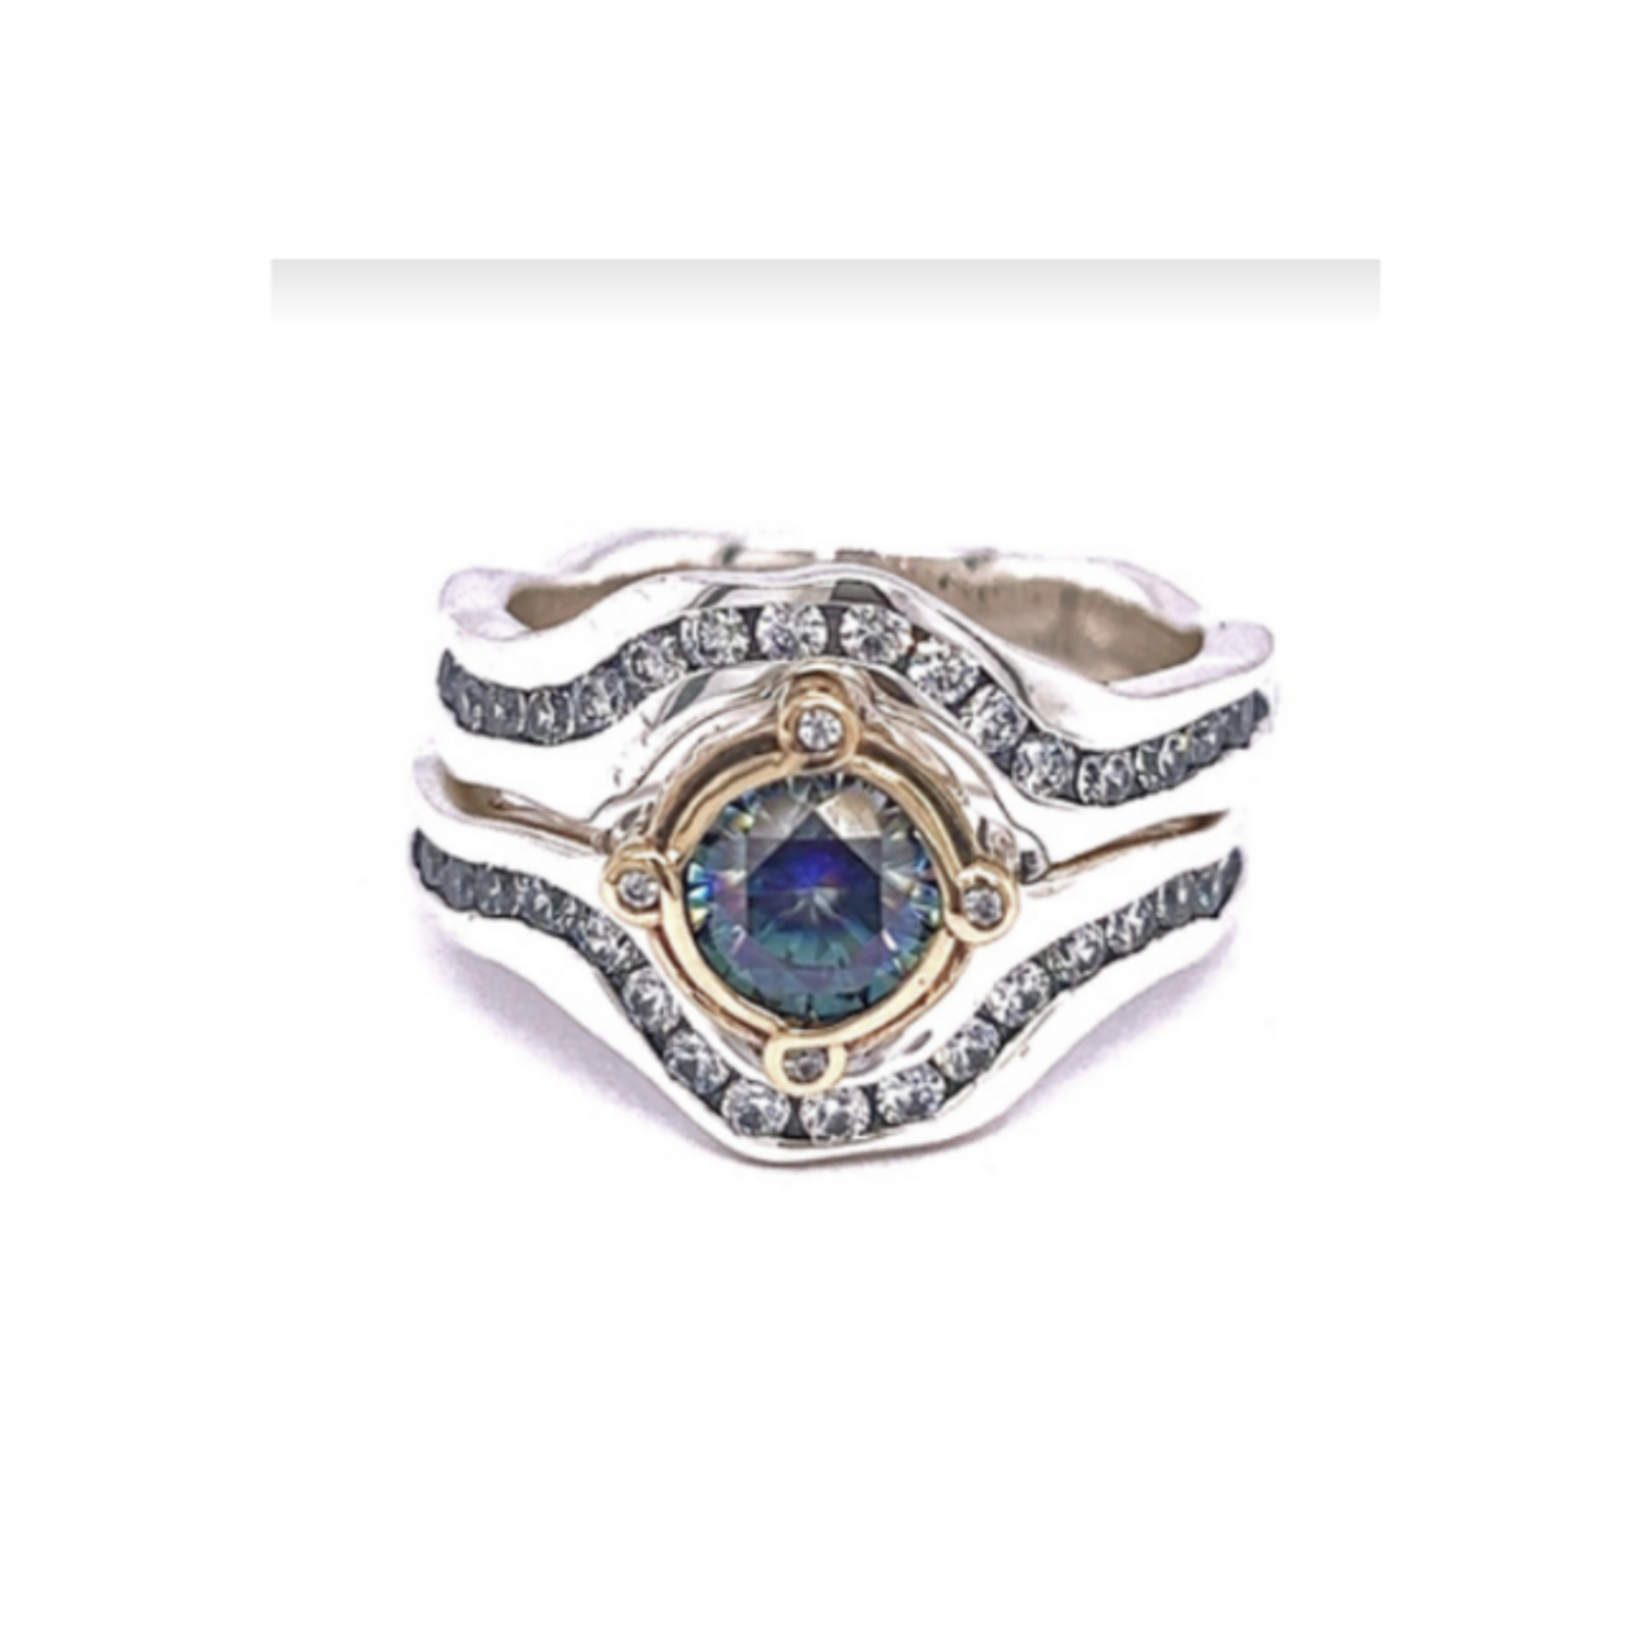 Keith Jack S/S + Oxidized Rocks n' Rivers Ring- Mystic Blue Moissanite